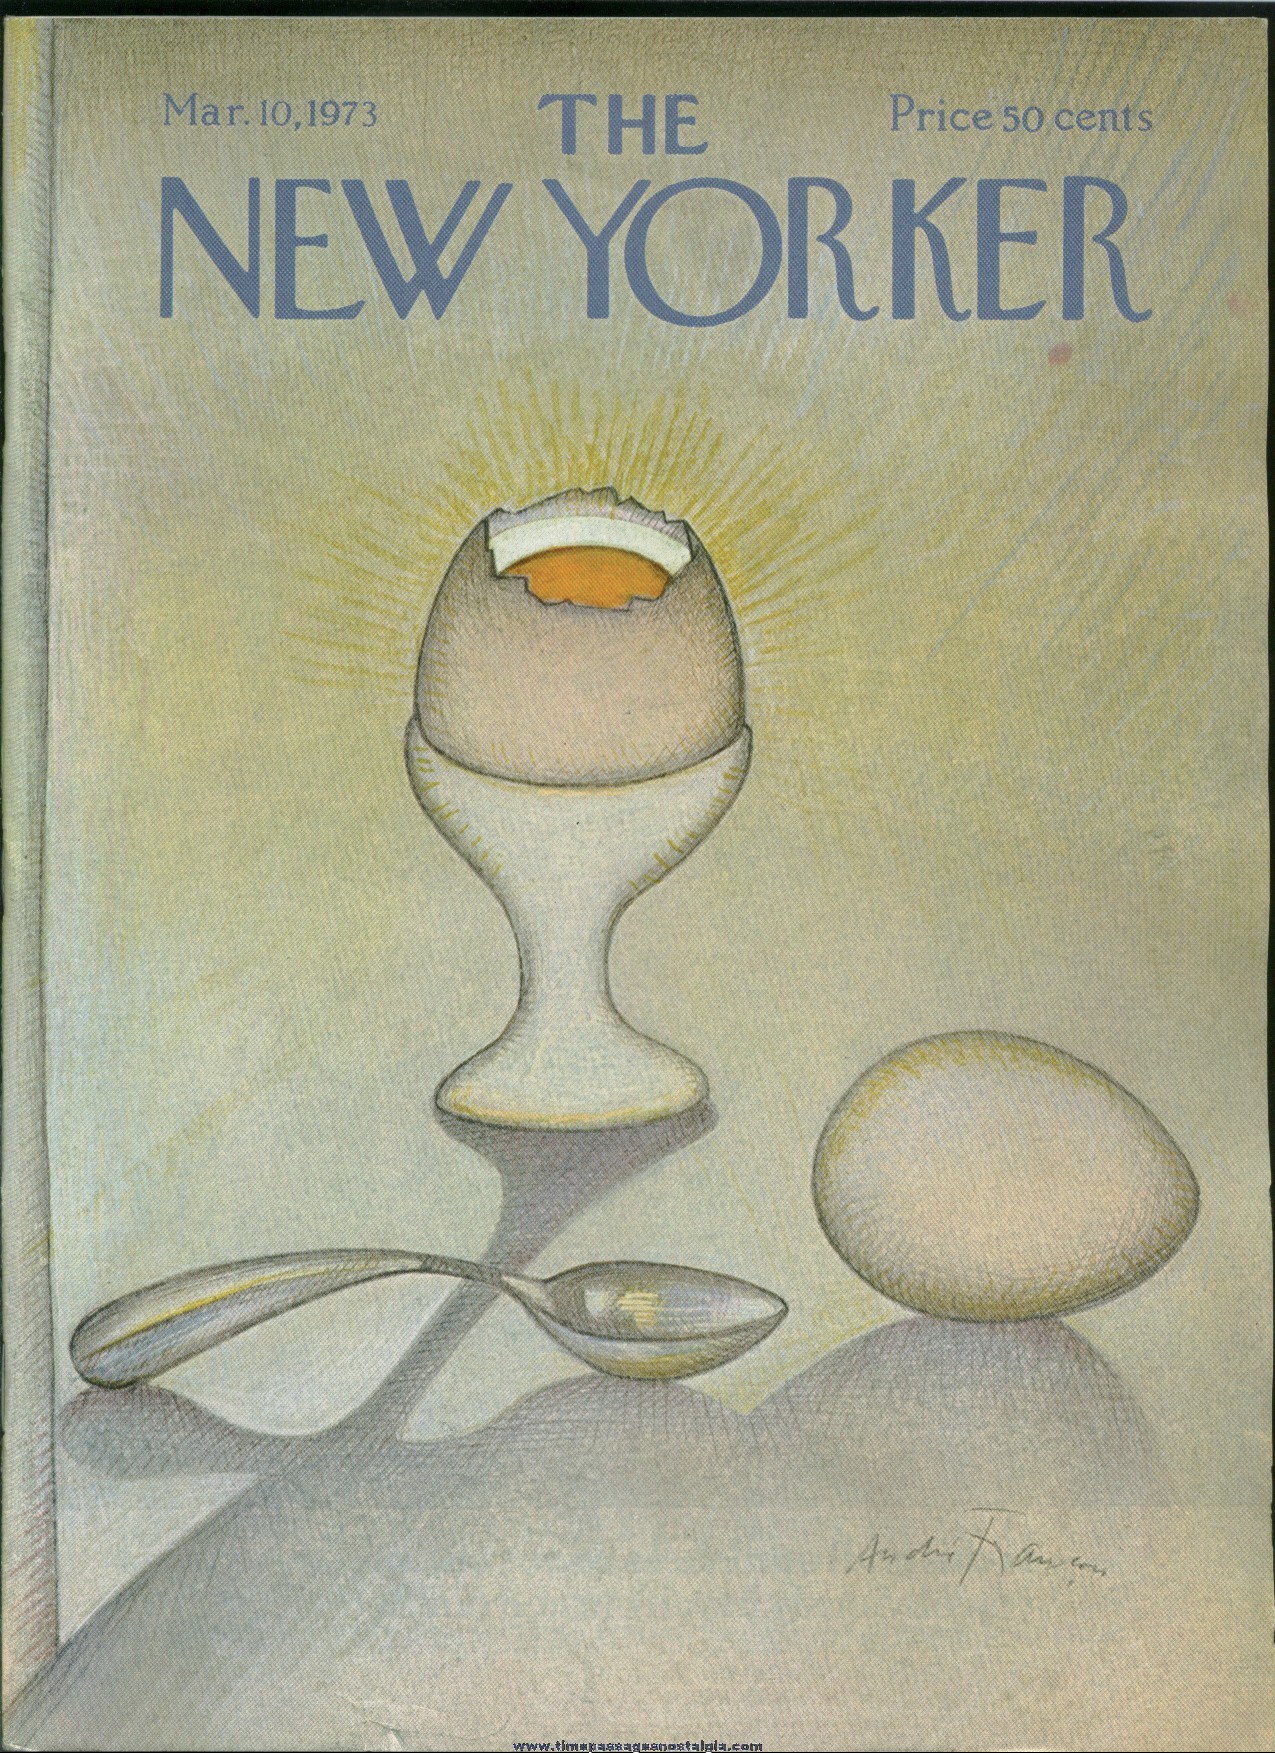 New Yorker Magazine - March 10, 1973 - Cover by Andre Francois